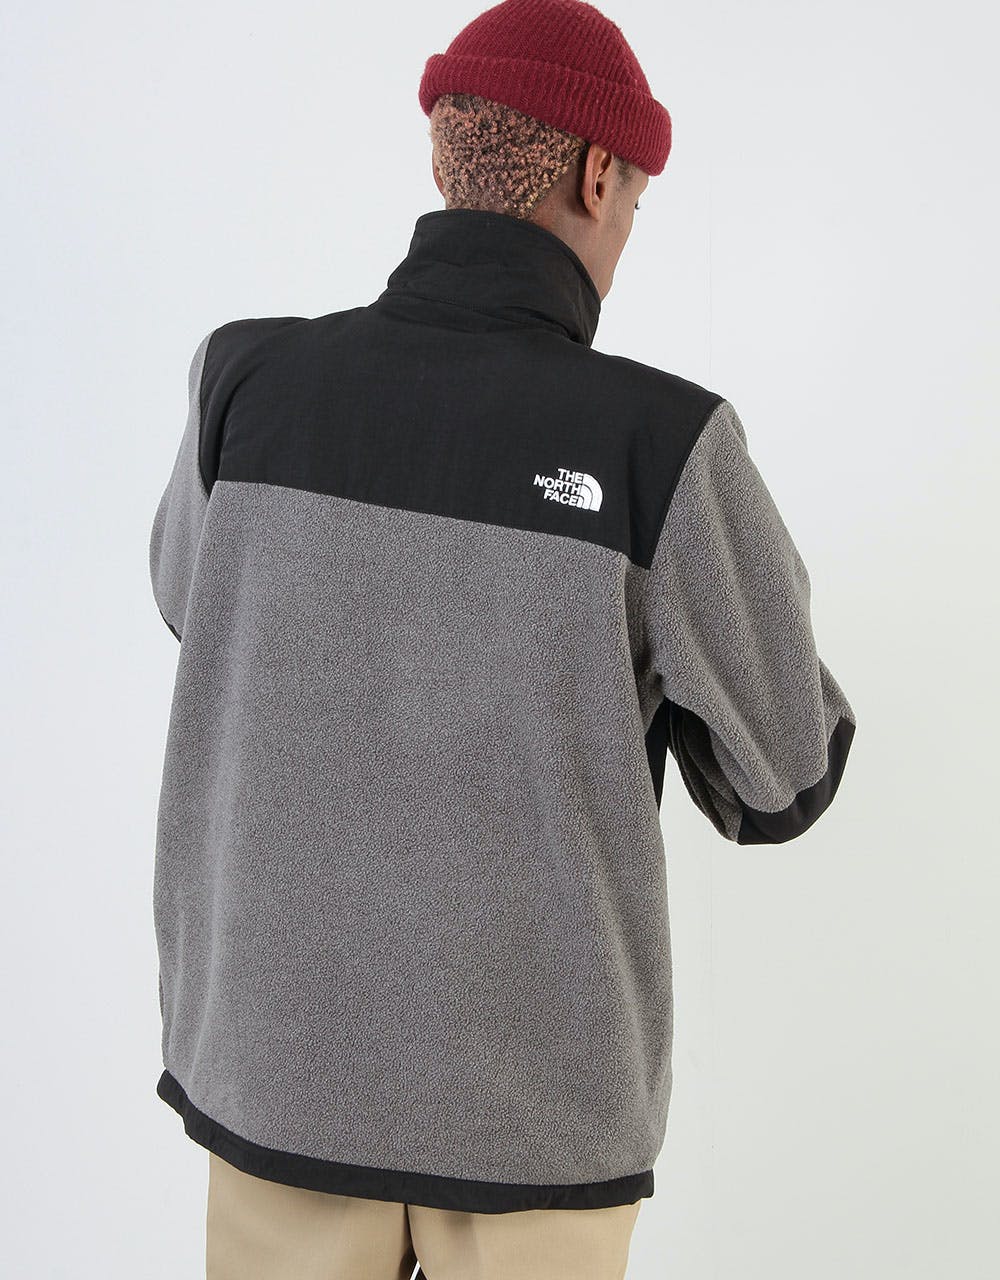 The North Face Denali Jacket 2 - Charcoal Grey Heather